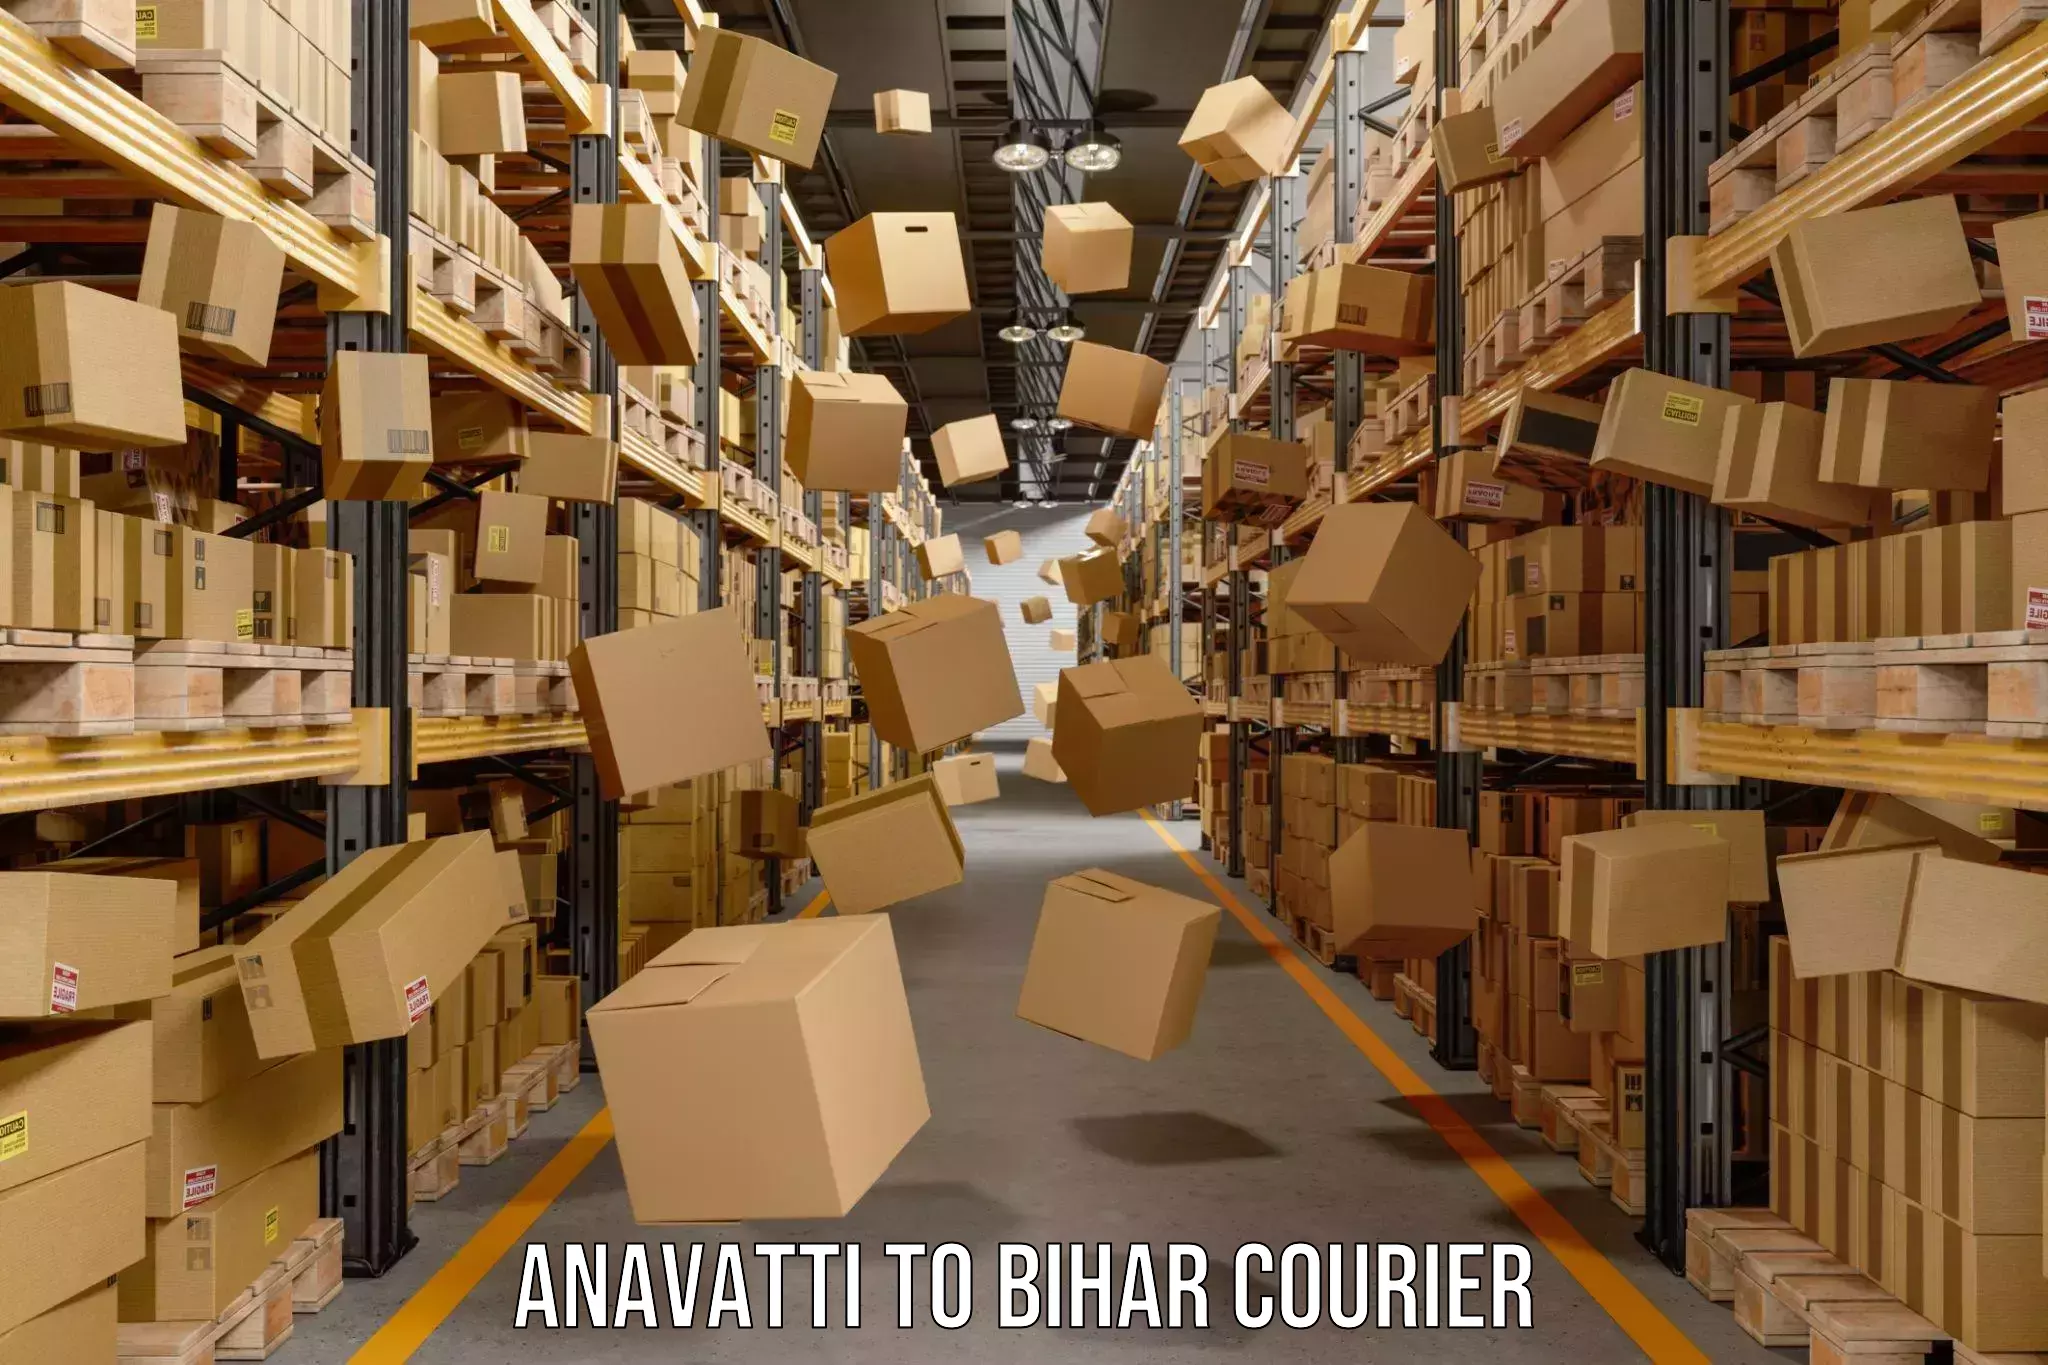 Automated parcel services Anavatti to Bihar